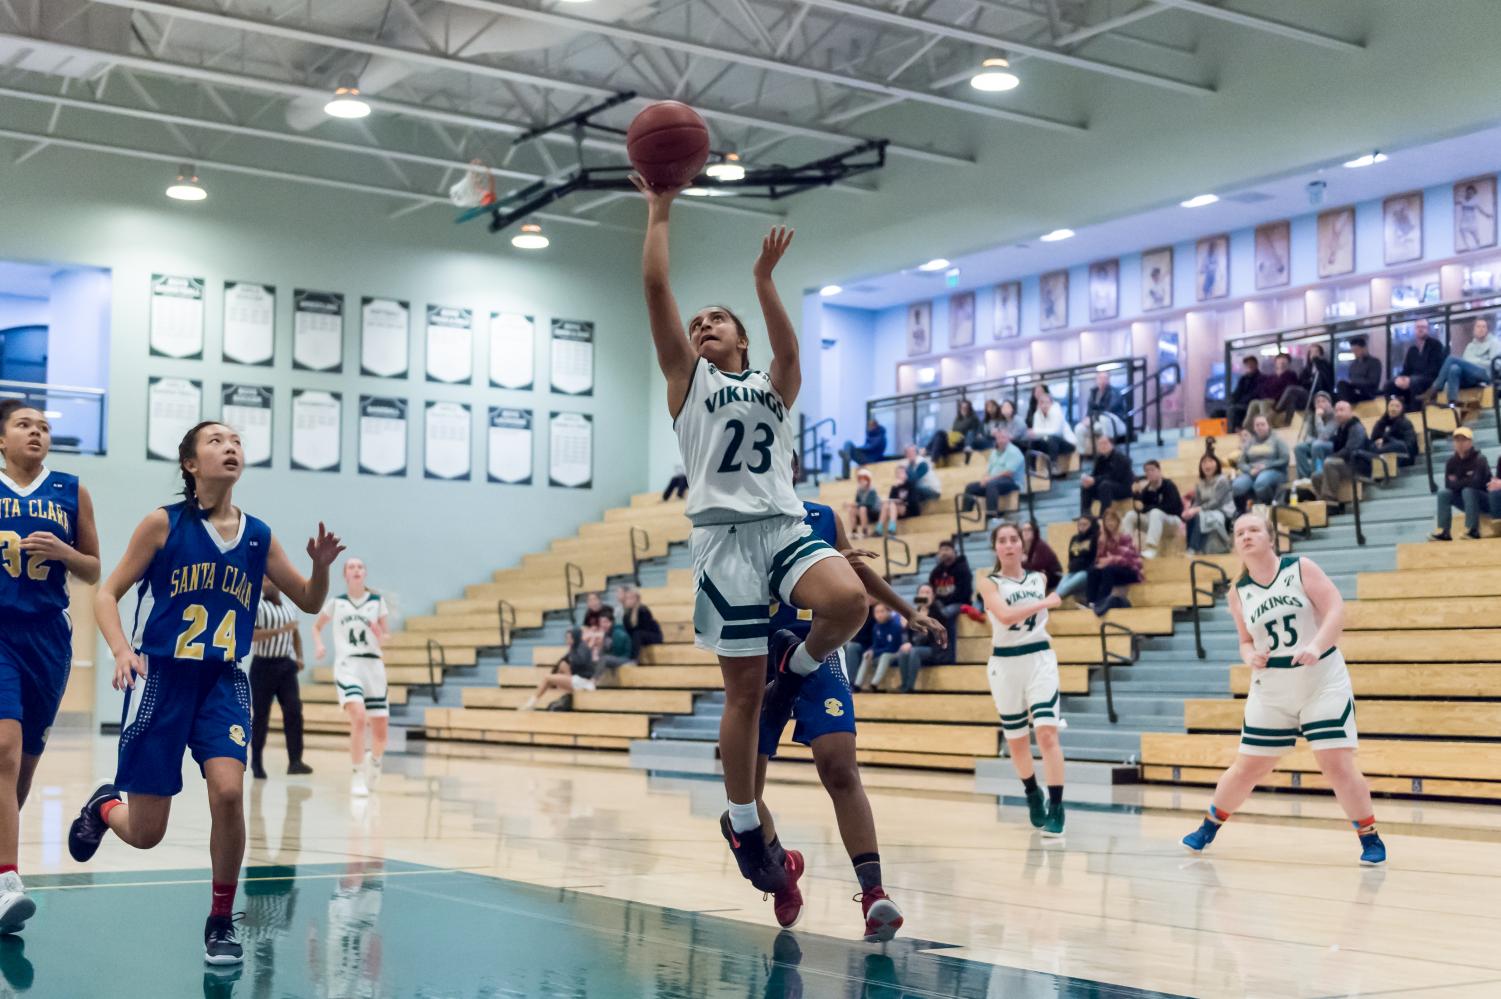 Opinion: Bigger fan base needed for girls' basketball games - The Paly Voice